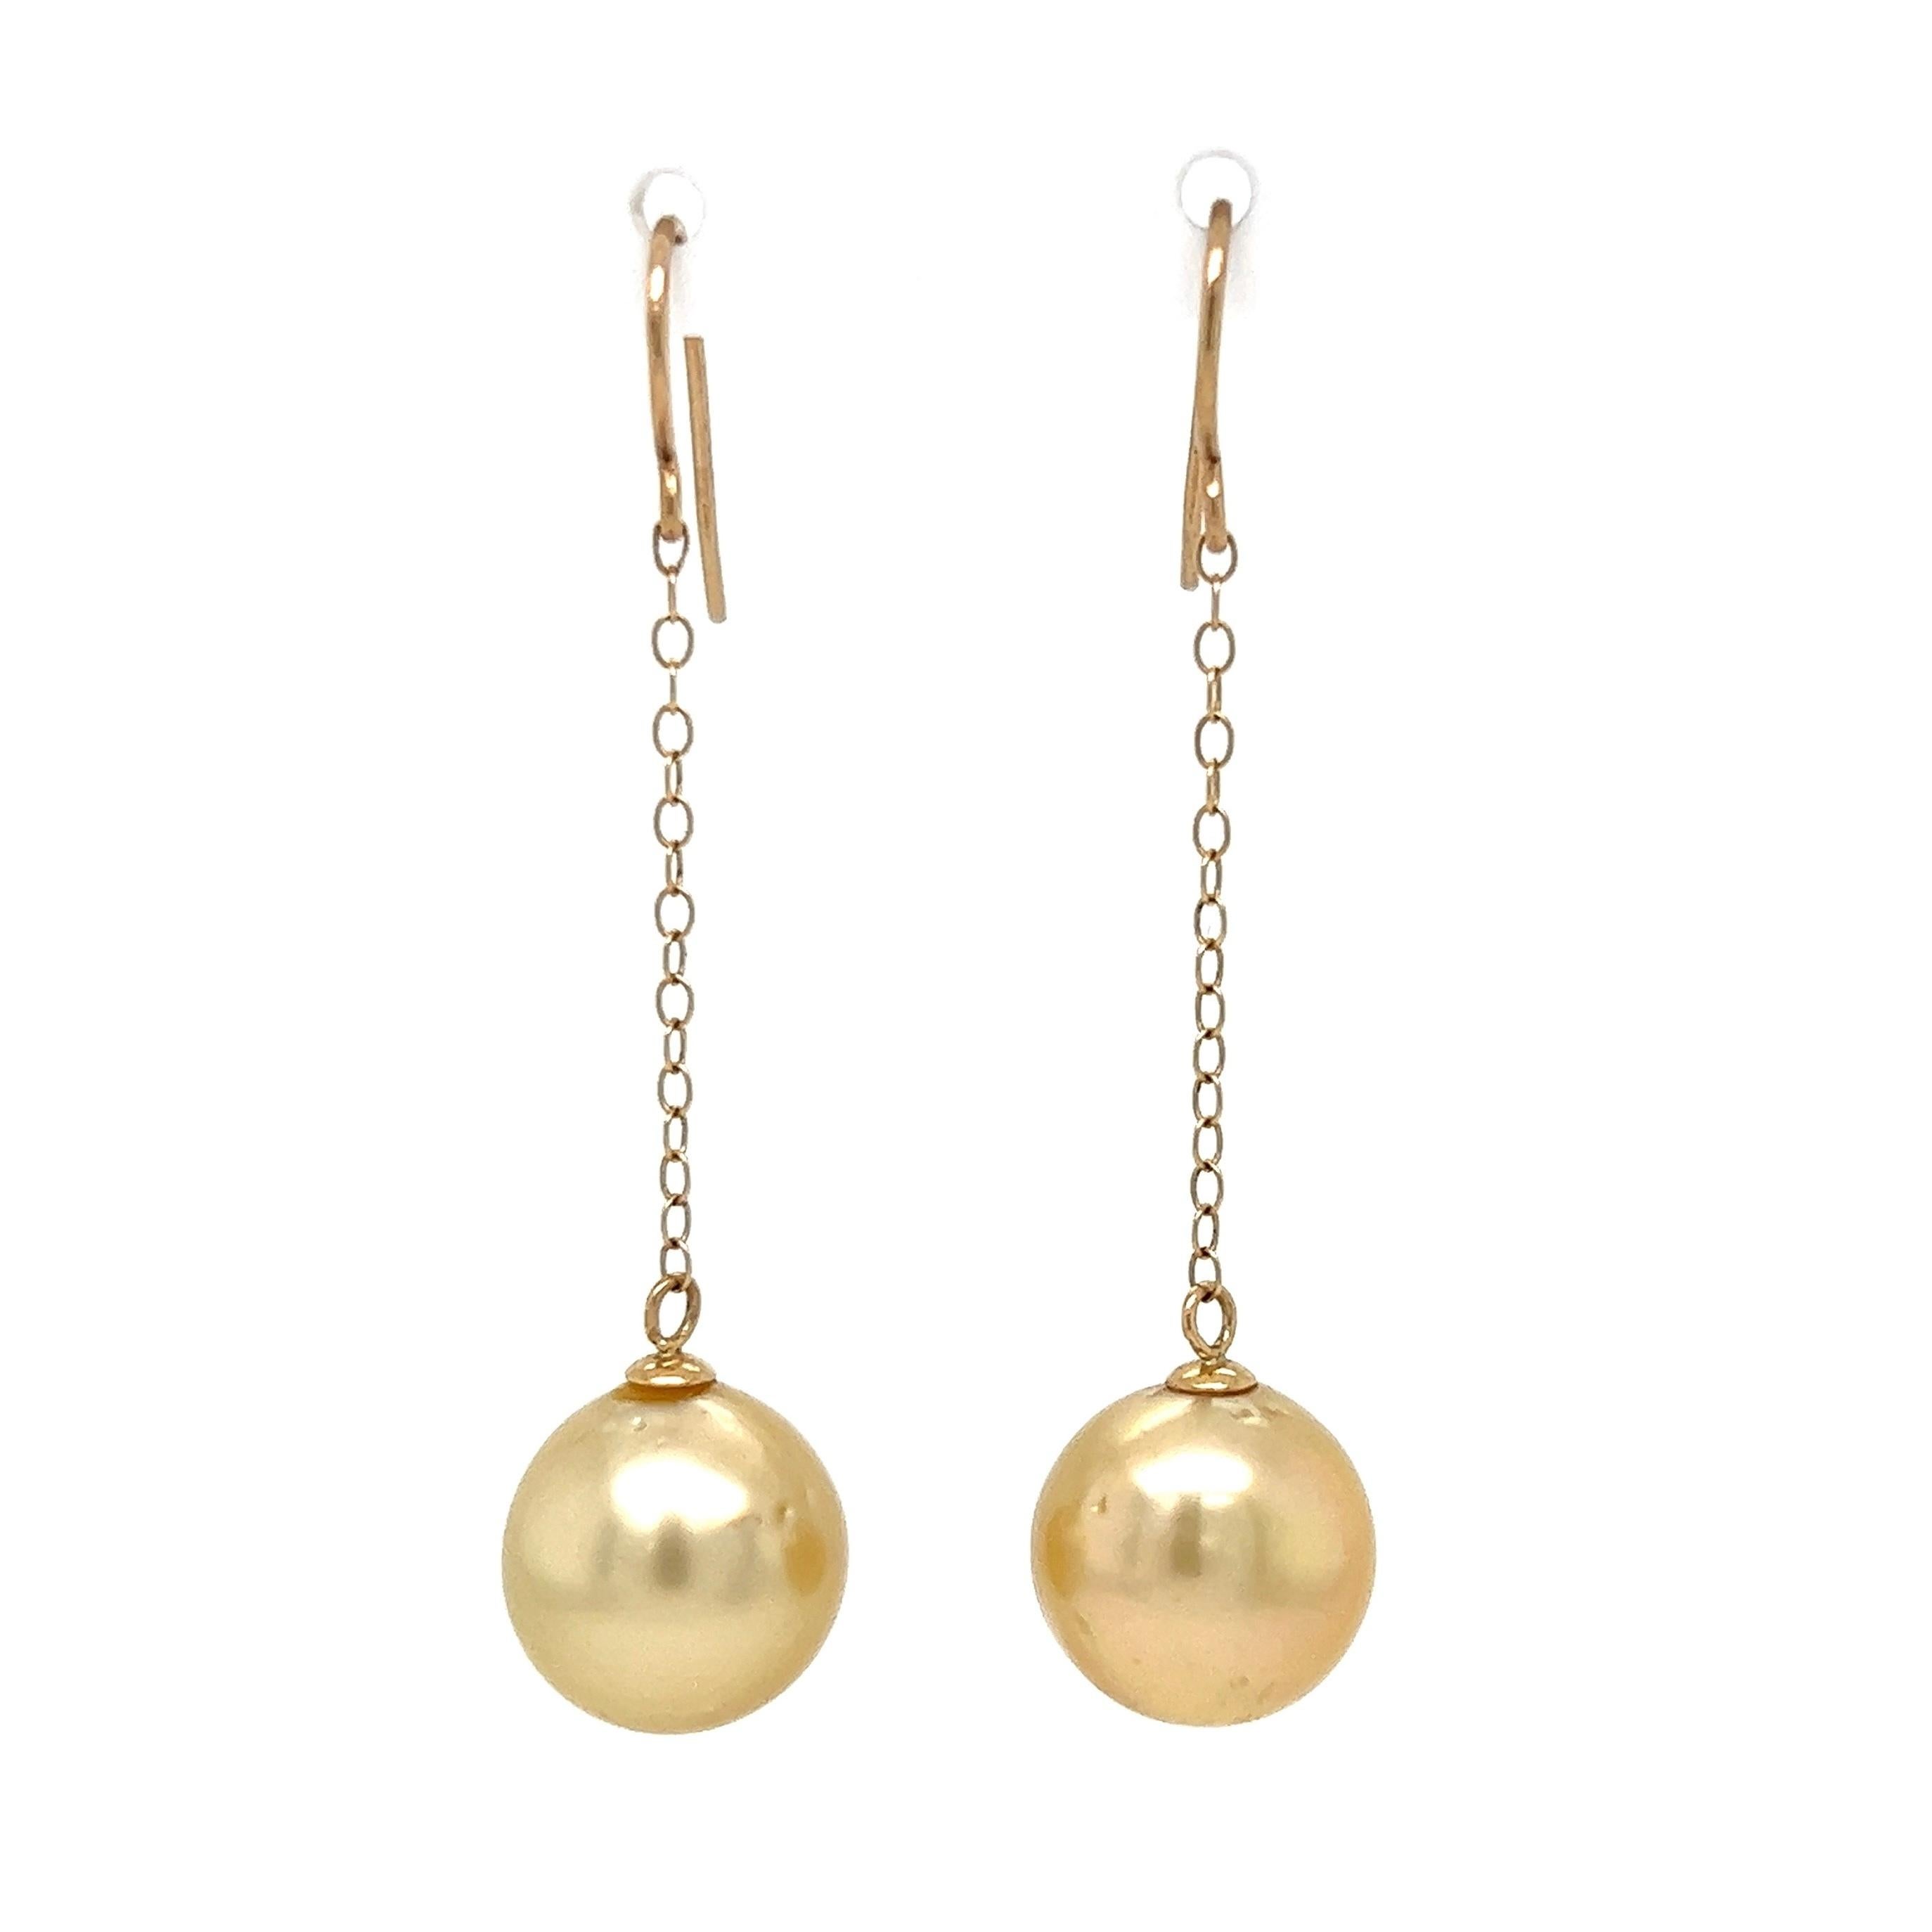 Simply Beautiful! 11.5mm South Sea Pearl Gold Drop Earrings. Suspended from a 14K Yellow Gold Link chain. Measuring approx. 1.8” l. The earrings are in excellent condition and were recently professionally cleaned and polished. These Simple and